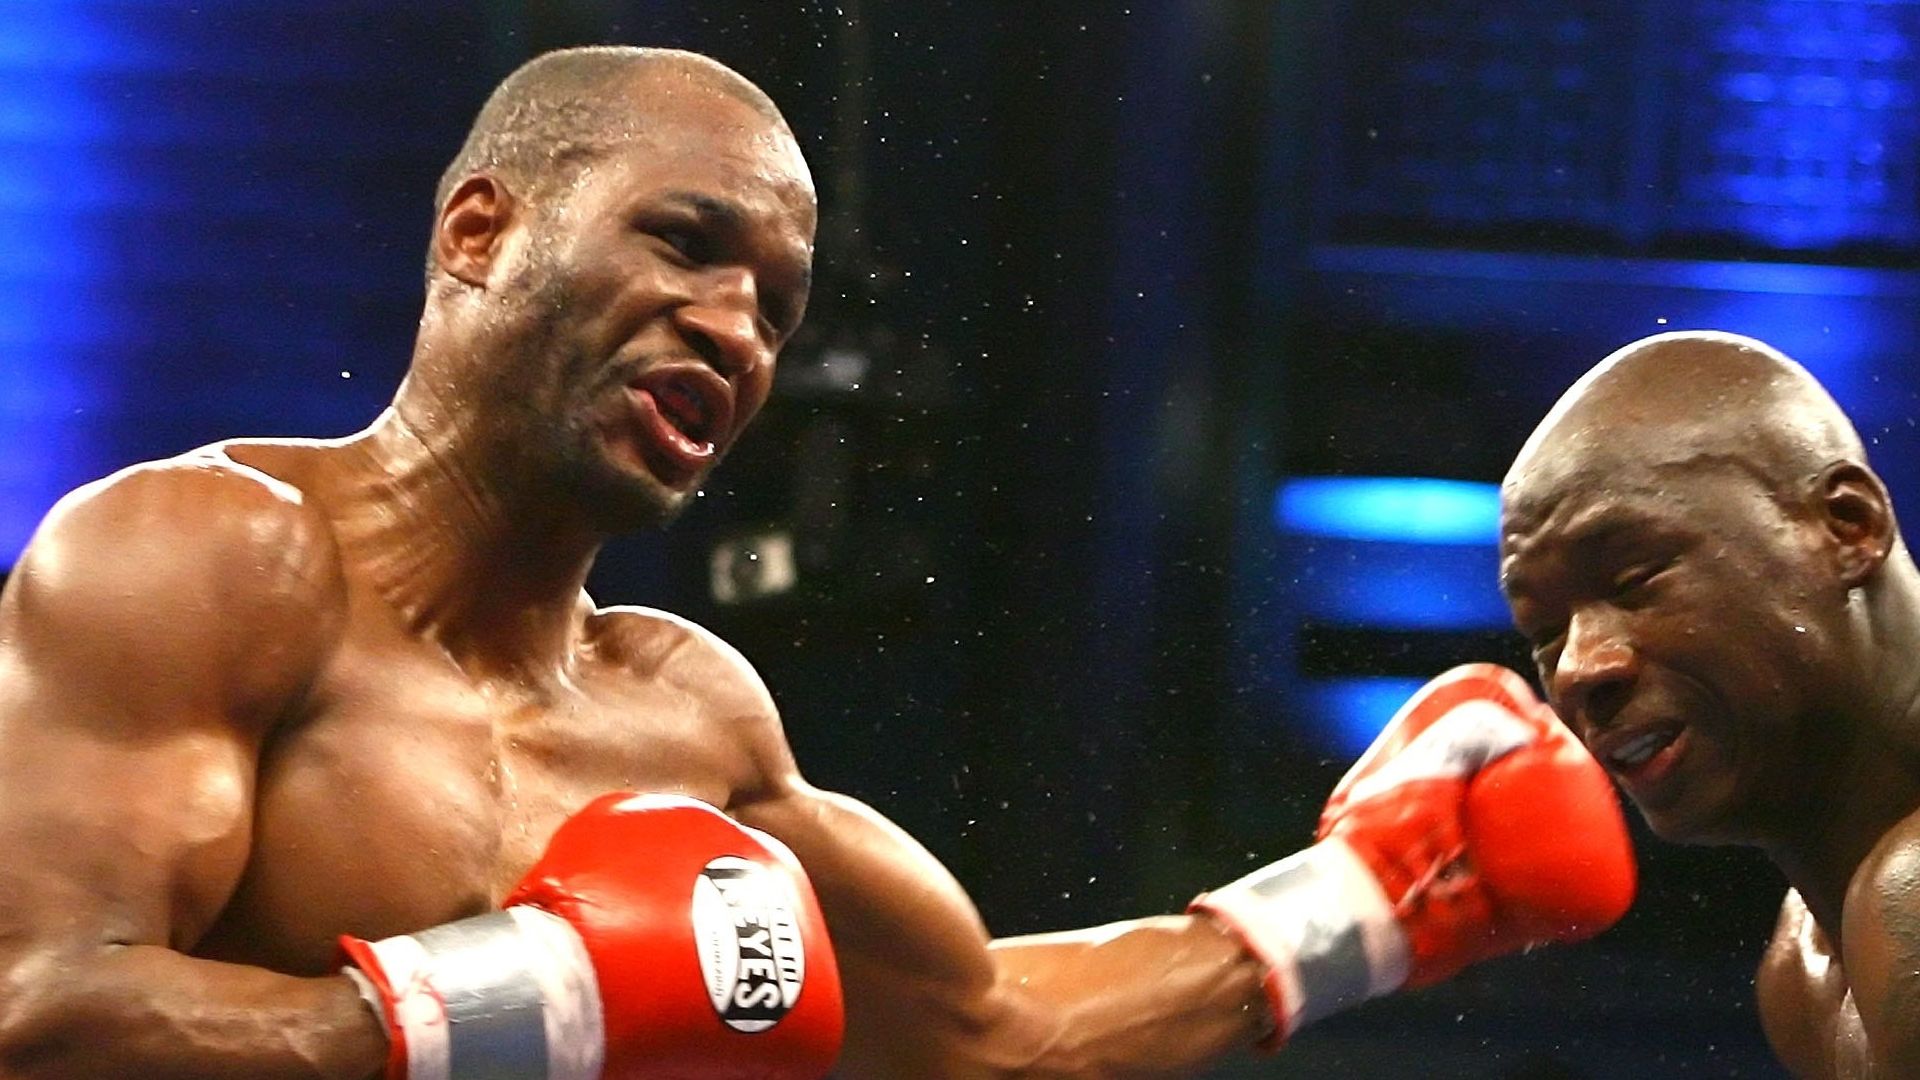 Bernard Hopkins, Shane Mosley have Hall of Fame inductions postponed due to coronavirus outbreak. DAZN News Canada